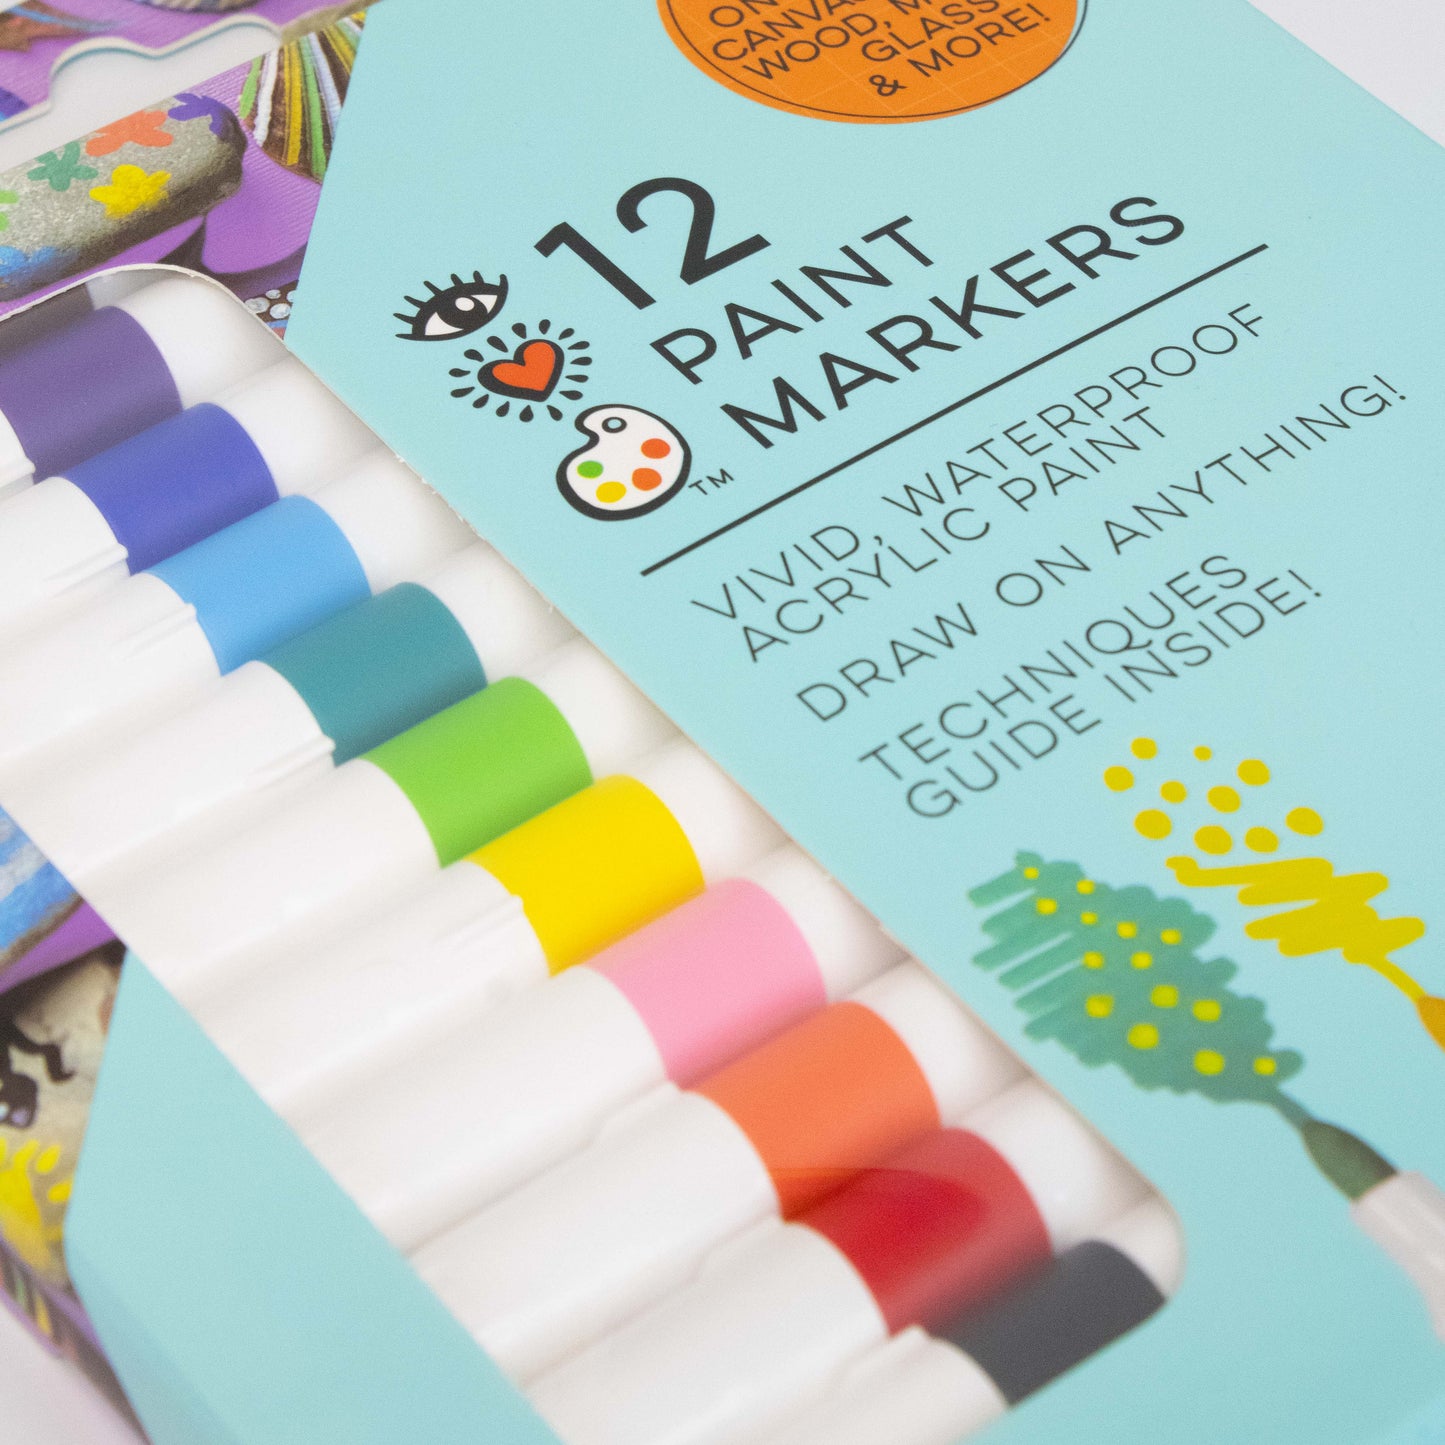 iHeartArt 12 Acrylic Paint Markers – brightstripes